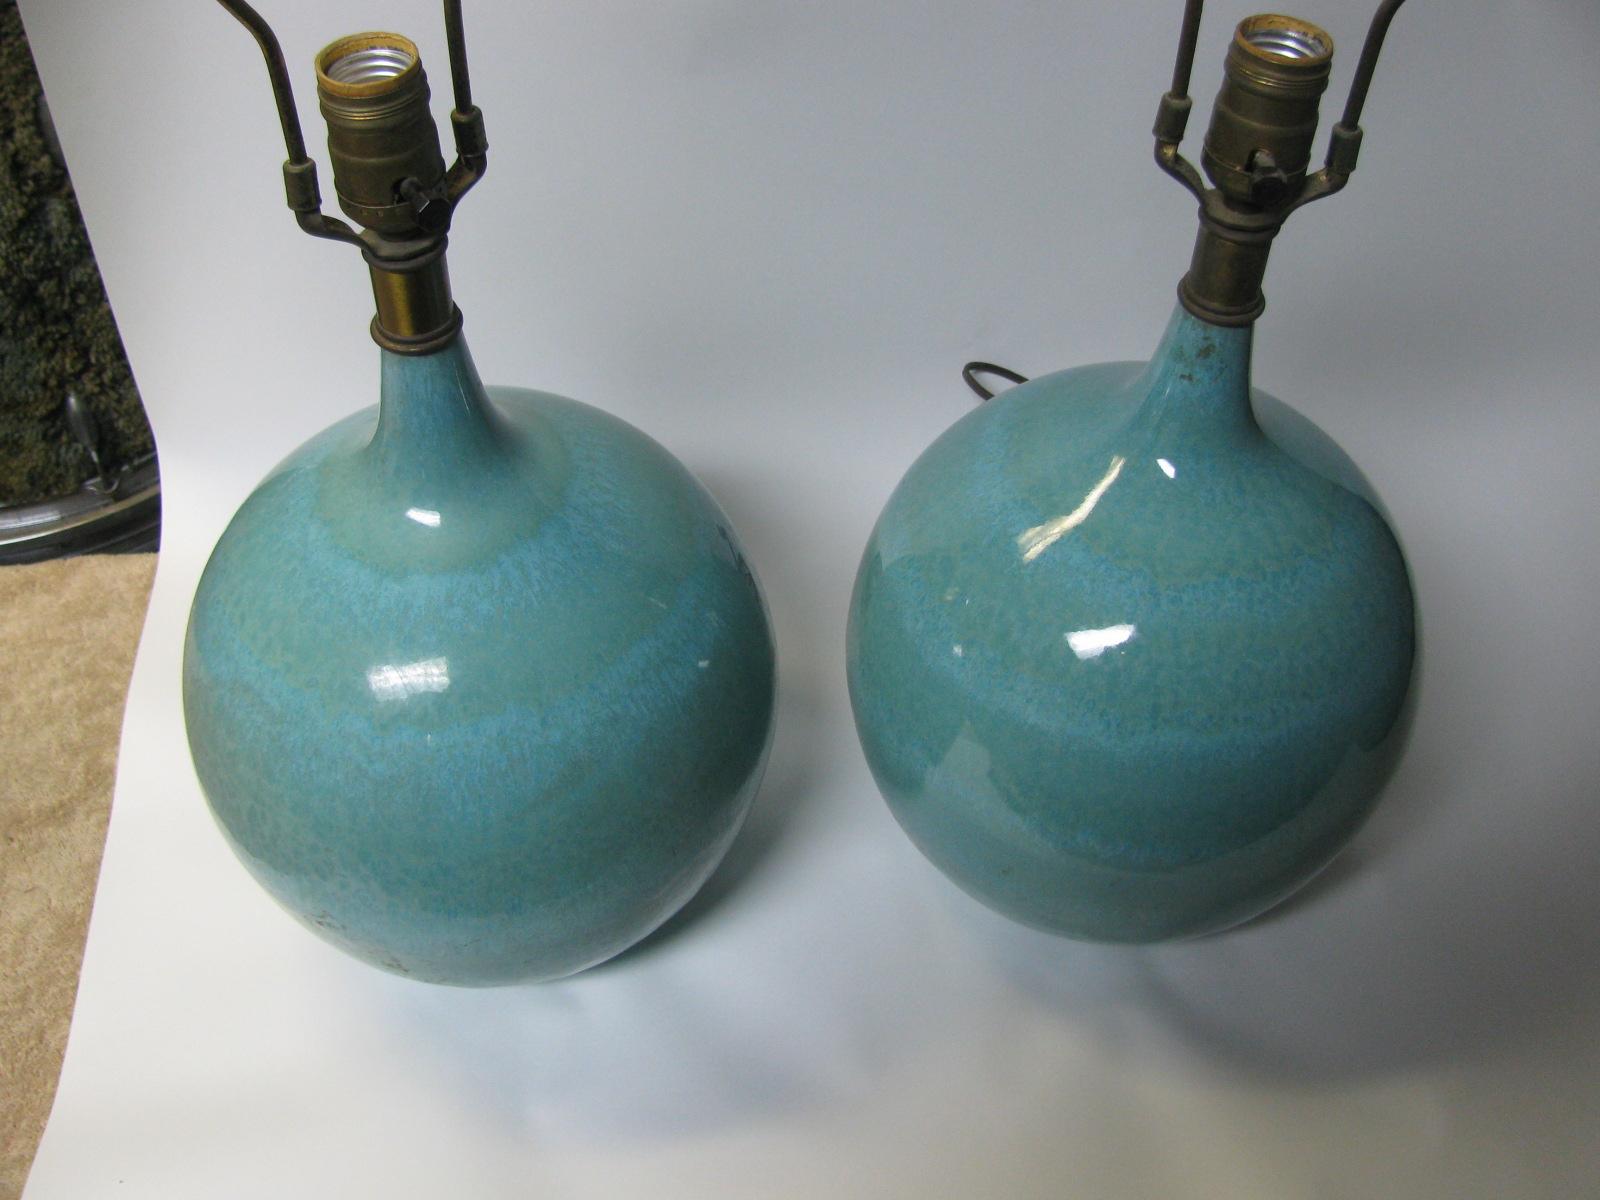 Beautiful pair of turquoise drip glaze round body table lamps. Pictured with white shades which are 23.5 D x 14.5 H. Color changes from turquoise to aqua green with banding, speckles, very serene.